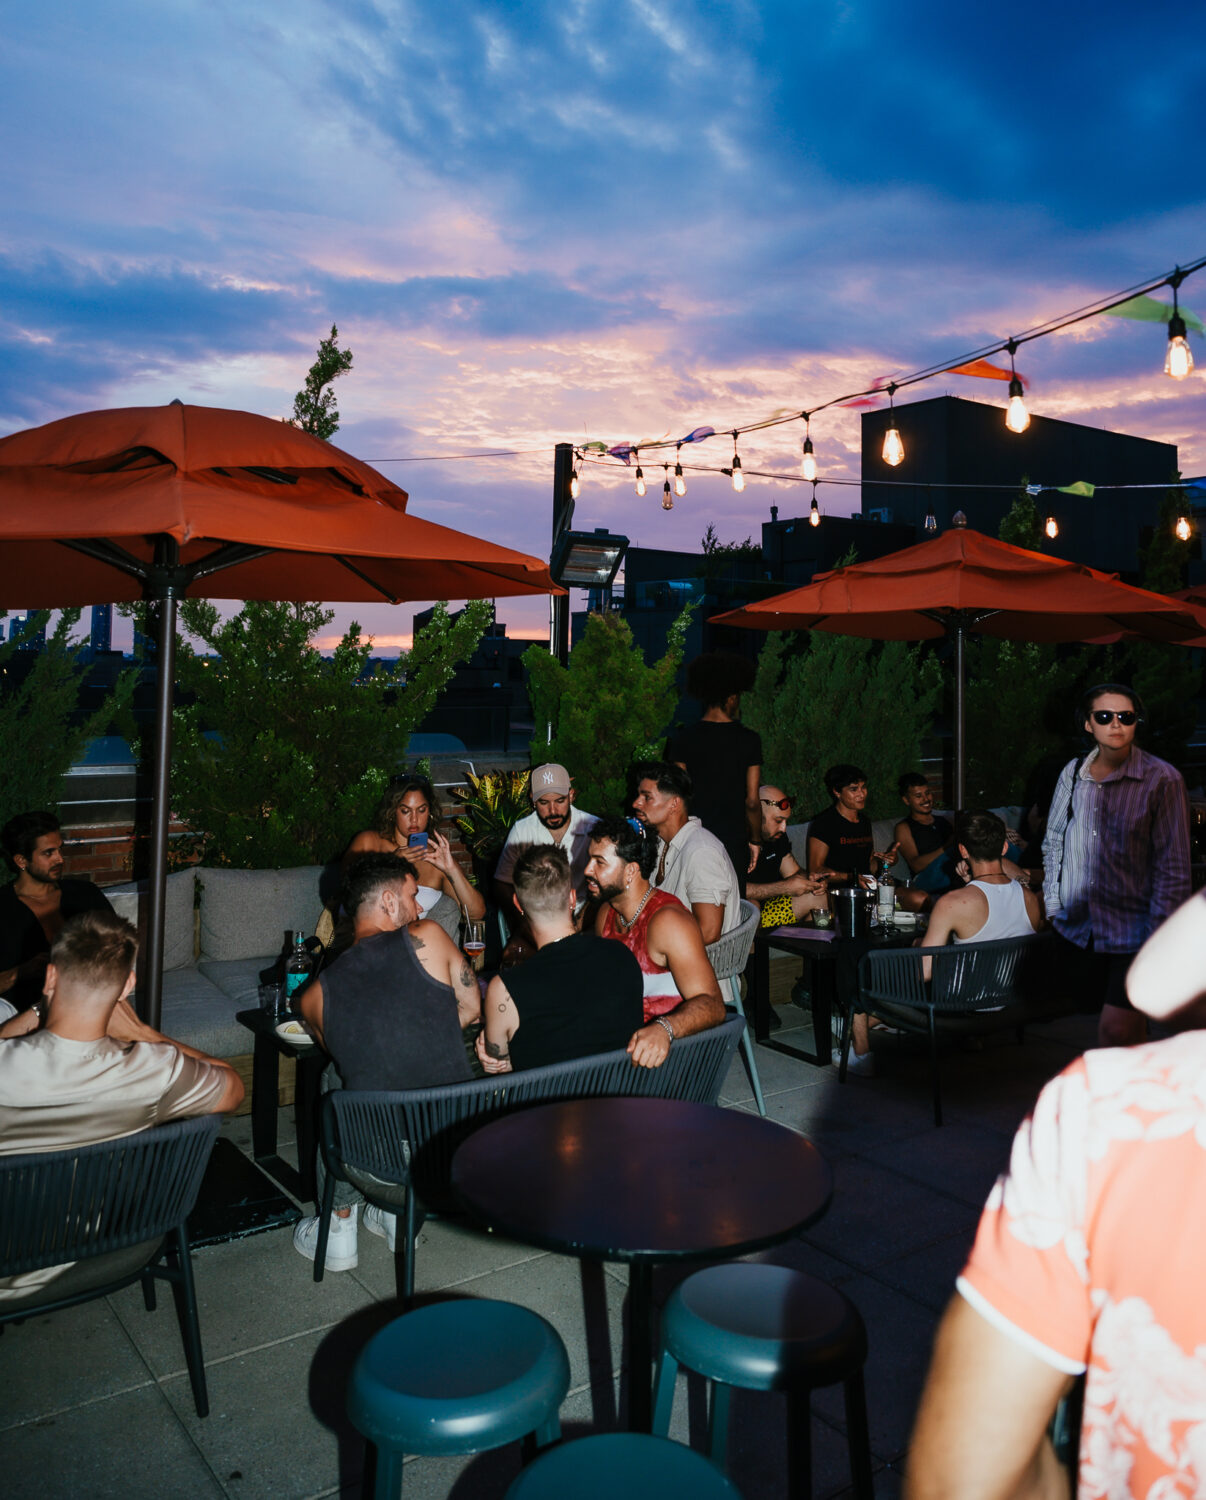 A group of people enjoy an evening at Arlo SoHogathering on a rooftop patio with string lights and orange umbrellas, against a backdrop of a colorful sunset sky.